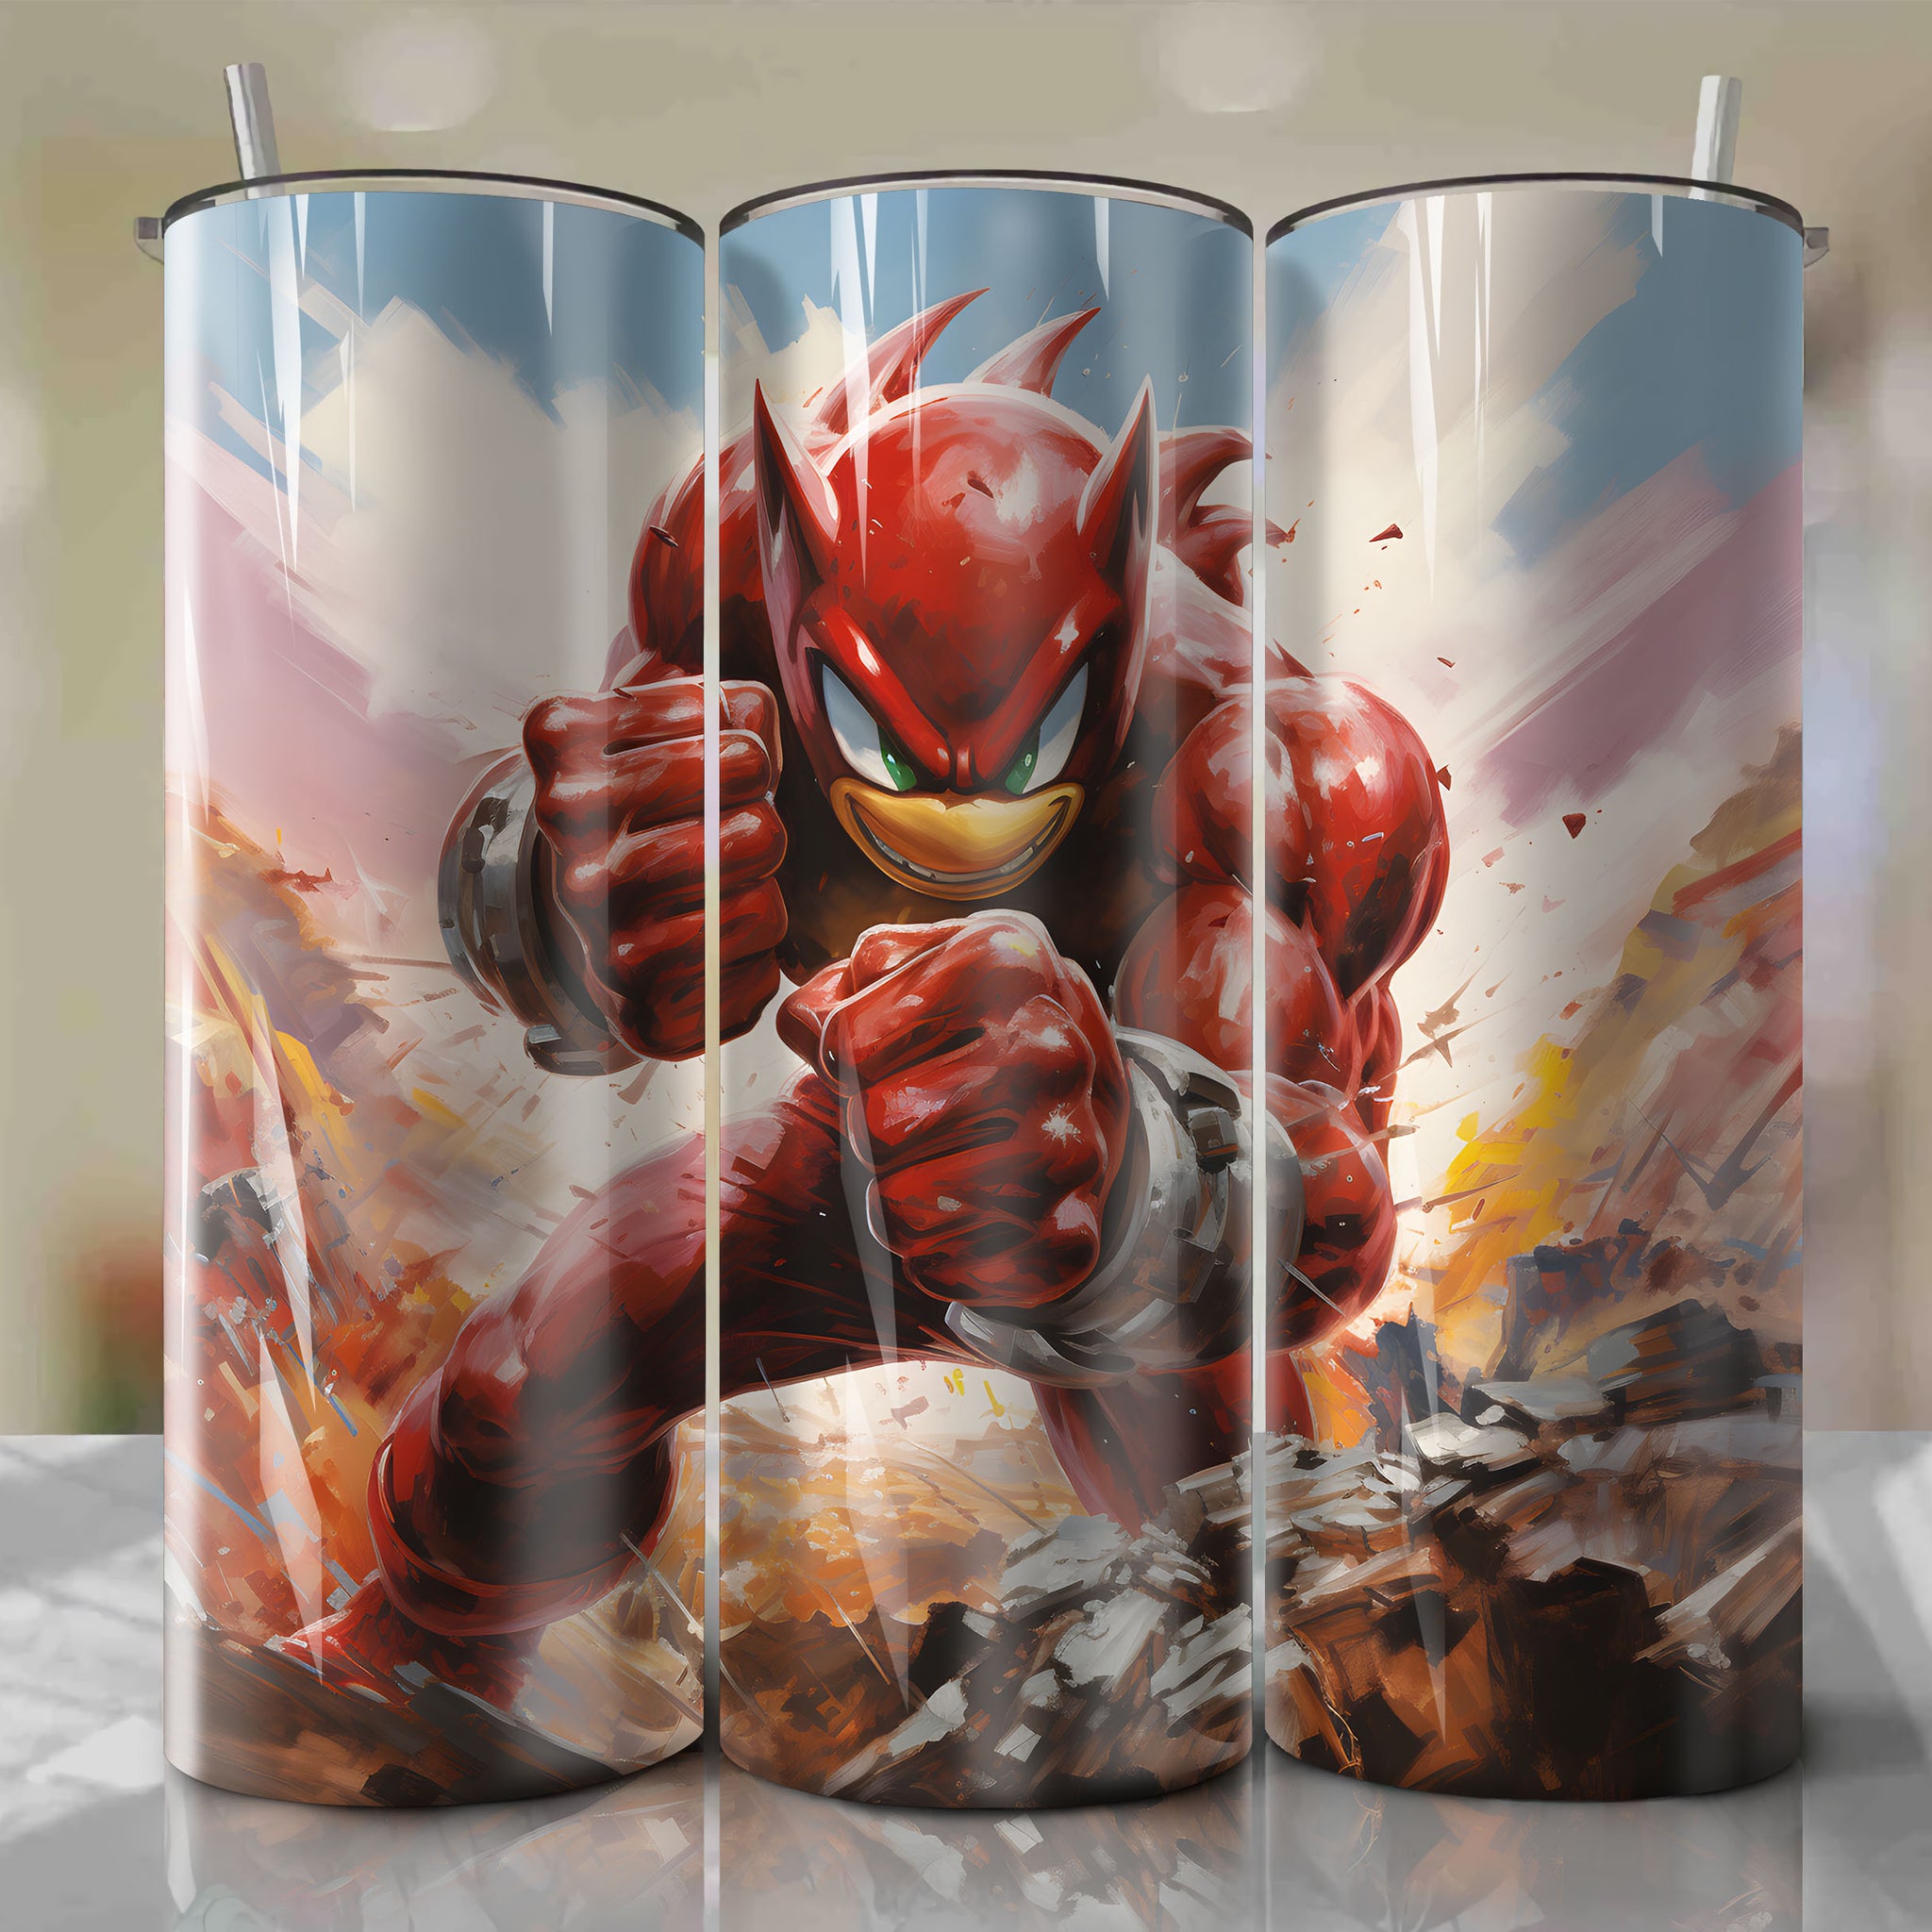 20 Oz Tumbler Wrap - A Bold and Intense Painting of Knuckles by Alex Ross
